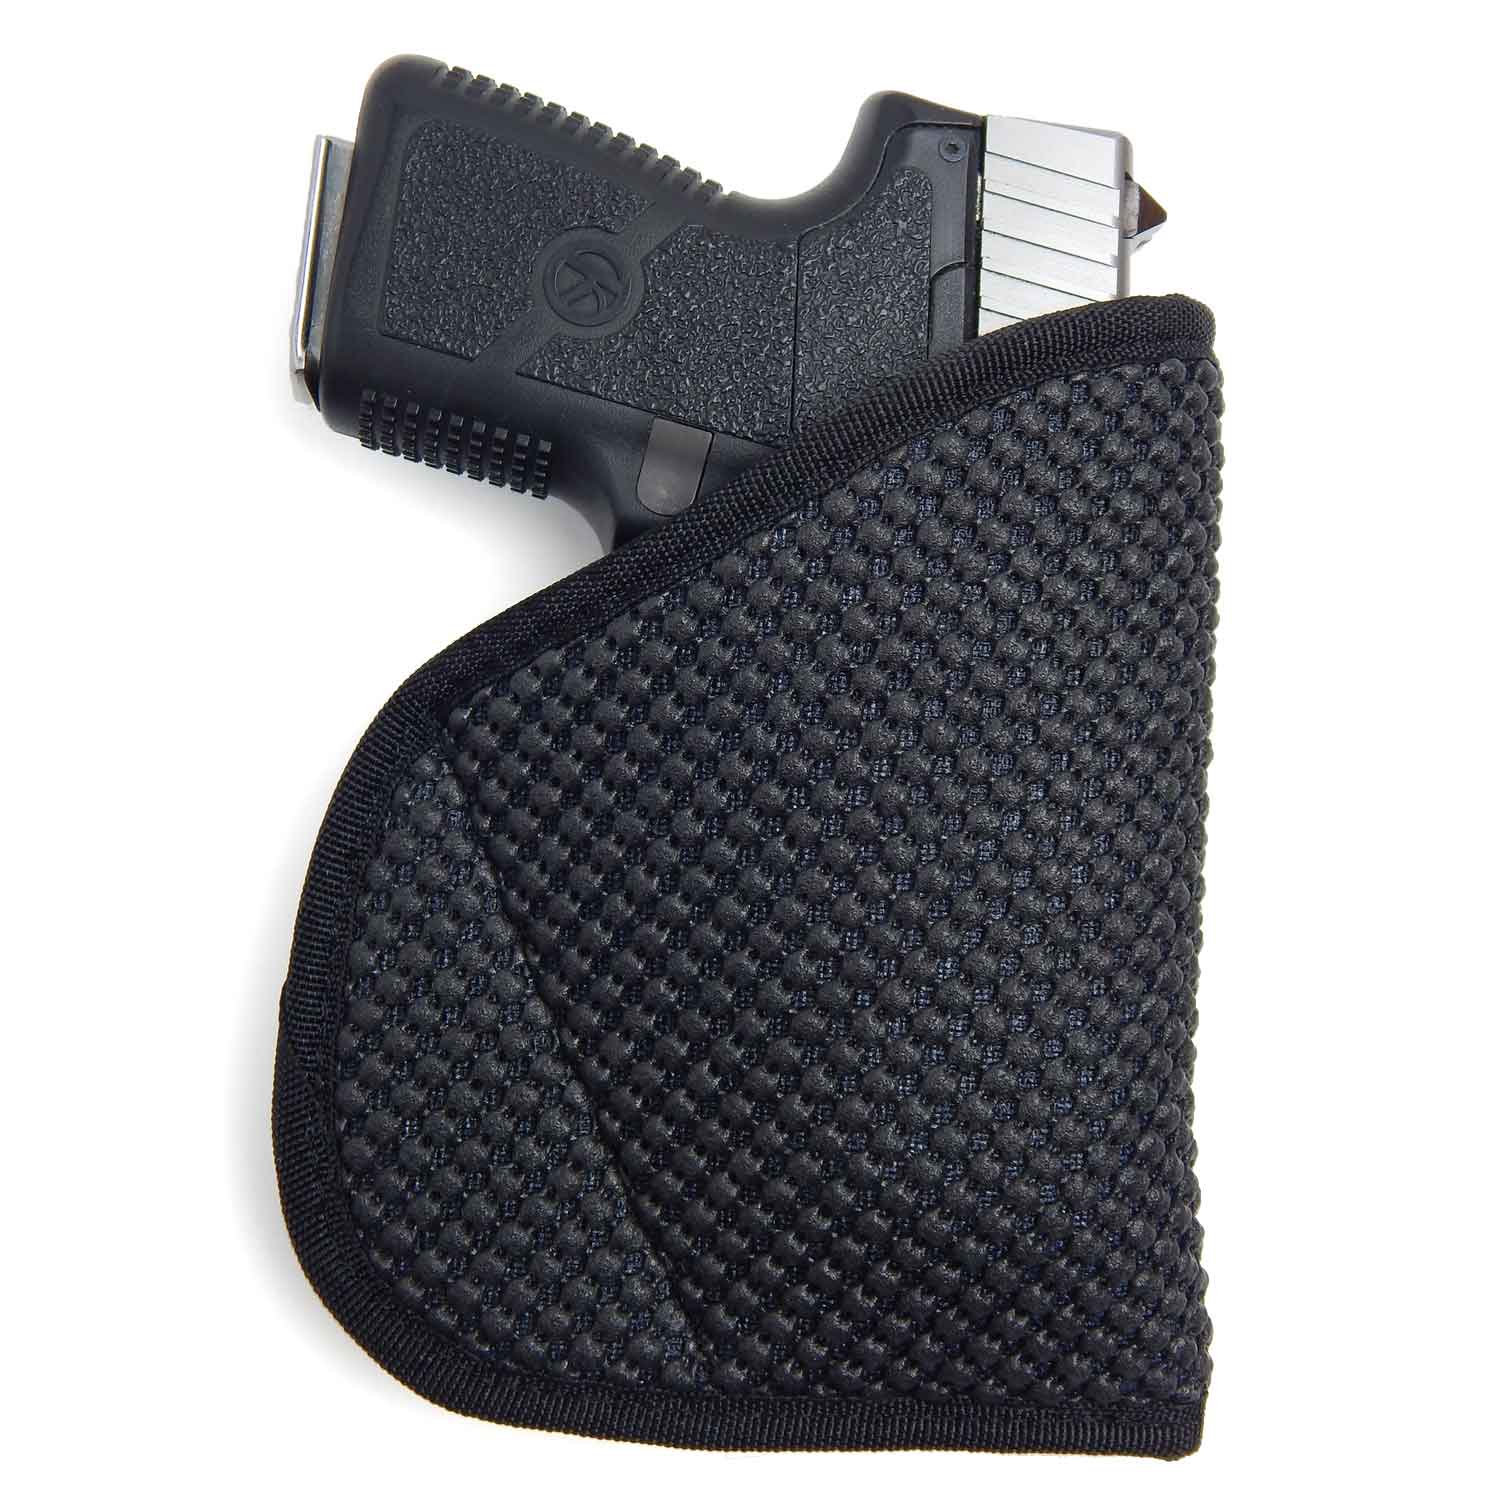 Tuckable Leather IWB Gun Holster - Active Pro Gear